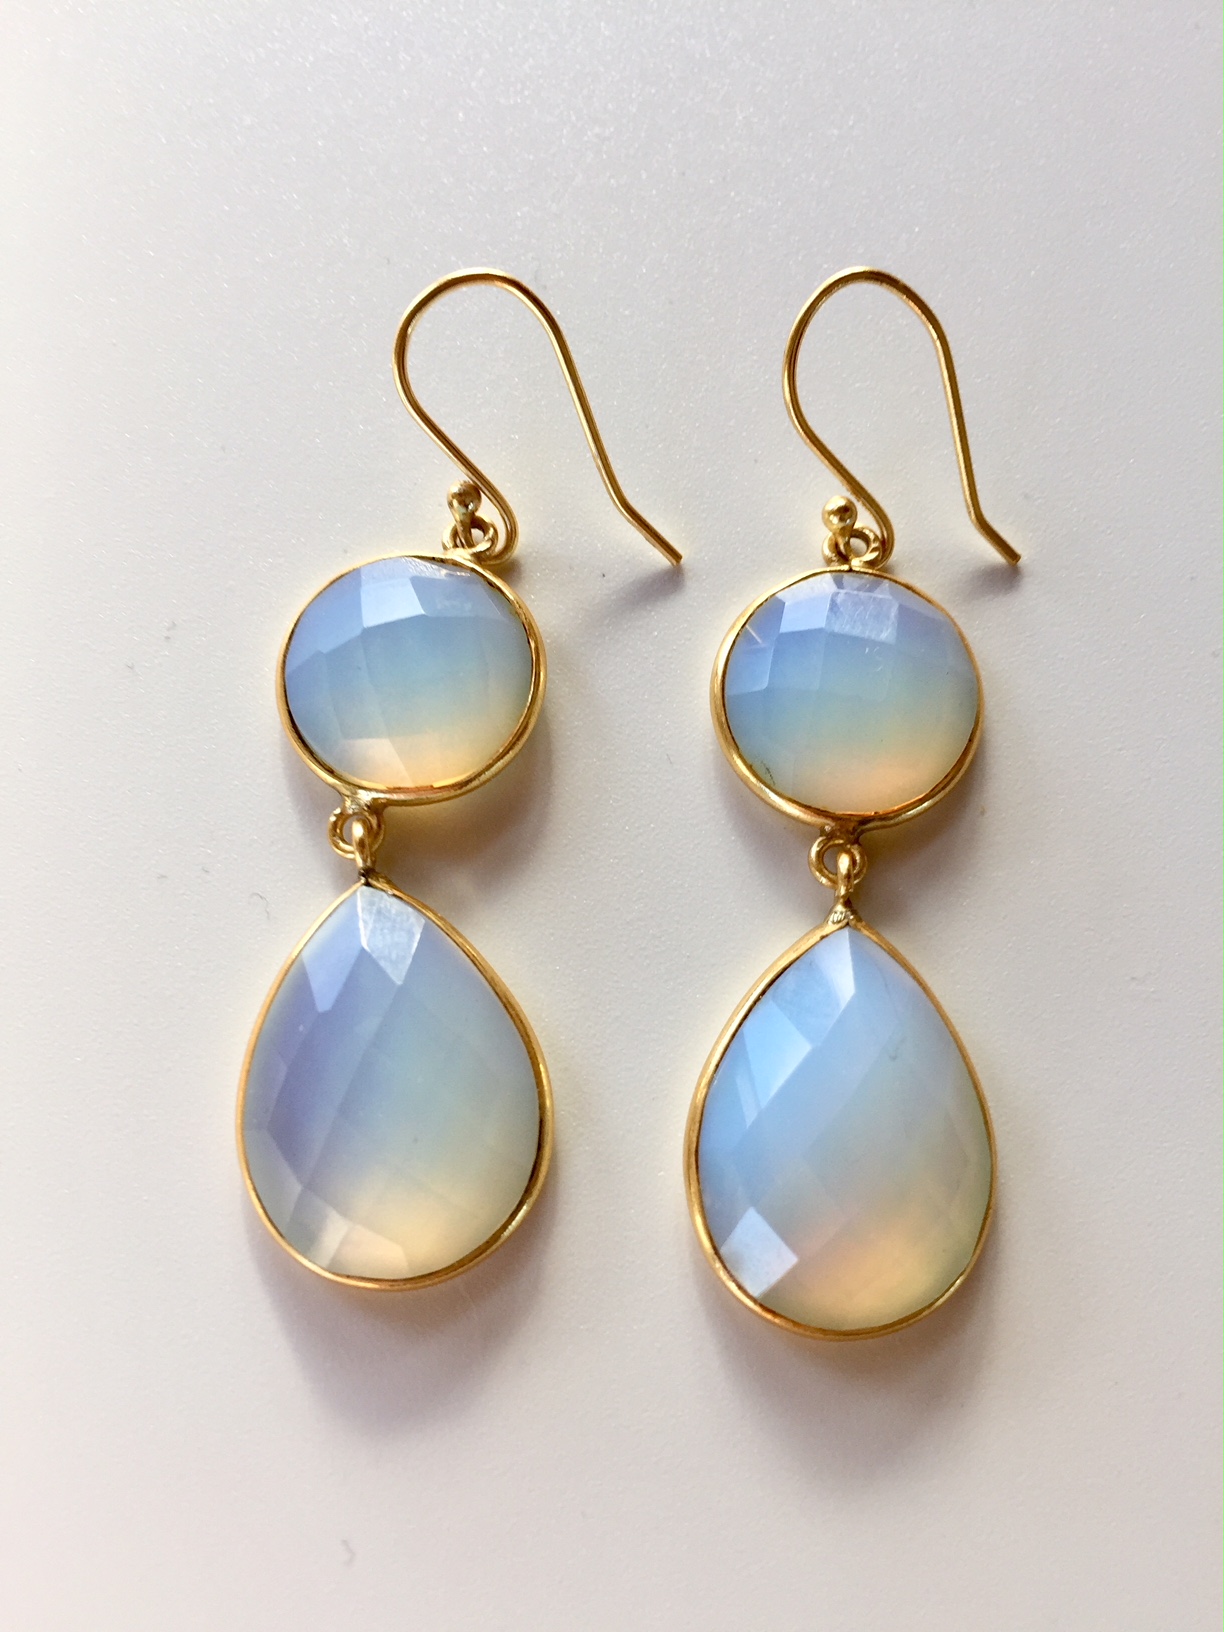 Gold Moon Stone Earrings - Julie McAfee - Transformational Guide